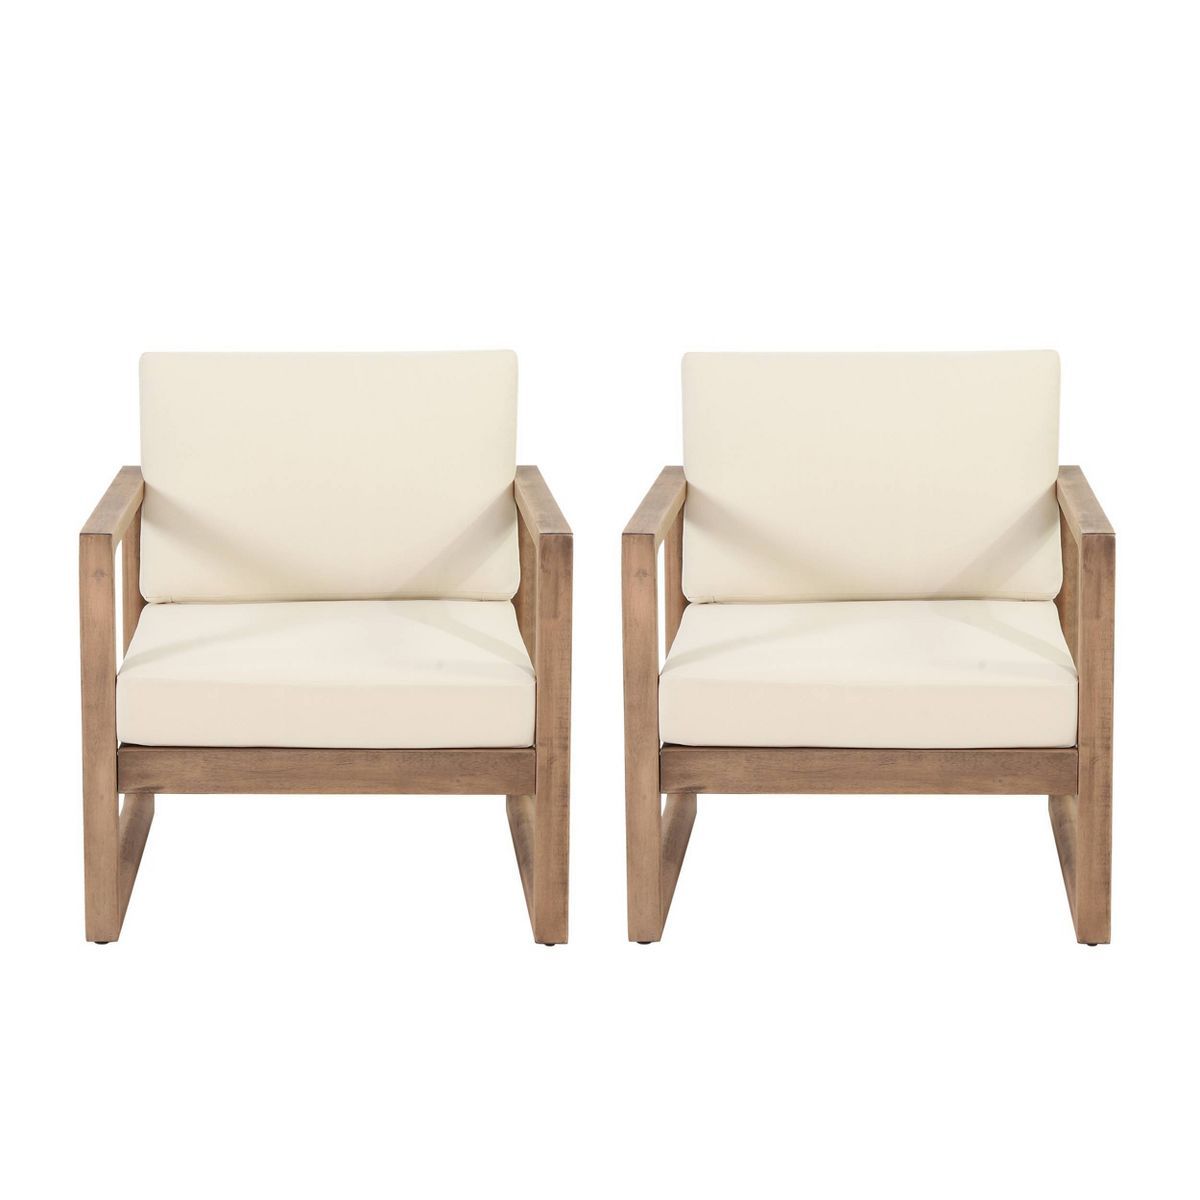 2pk Stefan Outdoor Acacia Wood Club Chairs with Cushions Brown/Beige - Christopher Knight Home | Target